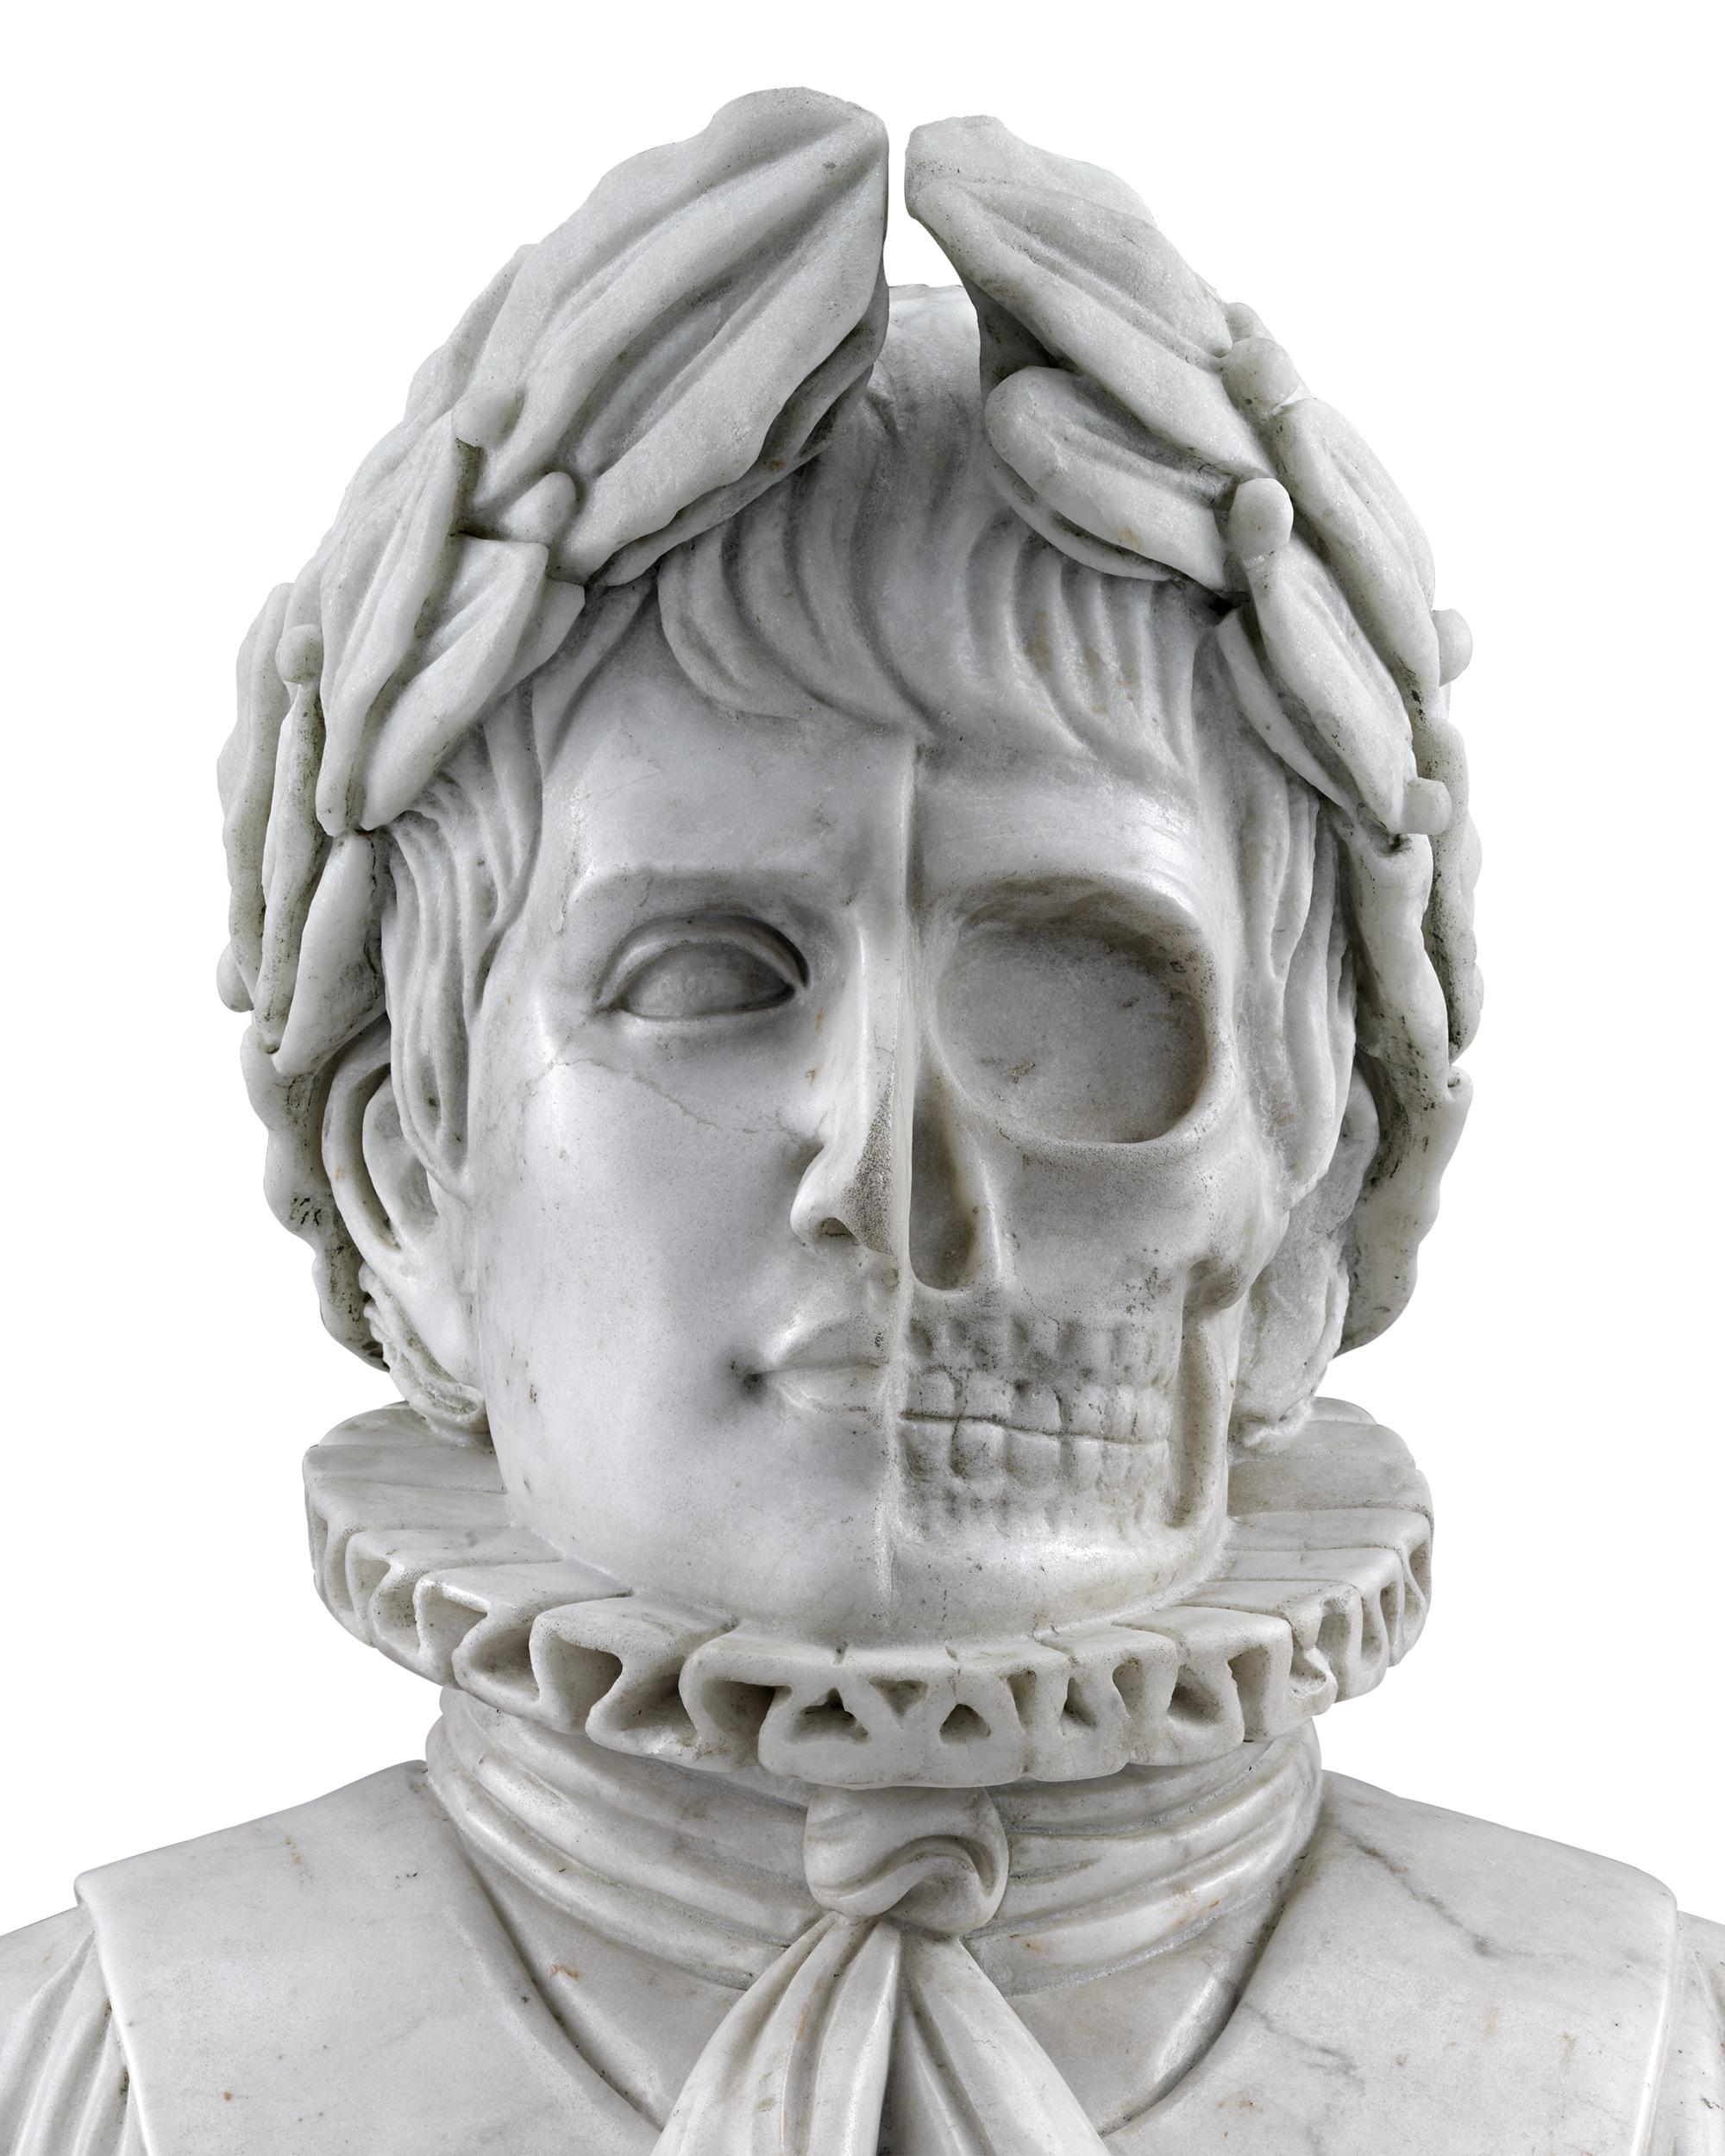 Grand in subject, scale and execution, this remarkable marble bust of Napoleon depicts the military and political leader in both life and death, as half his face is crafted to reveal the structure of his noble skull. While there are many busts of